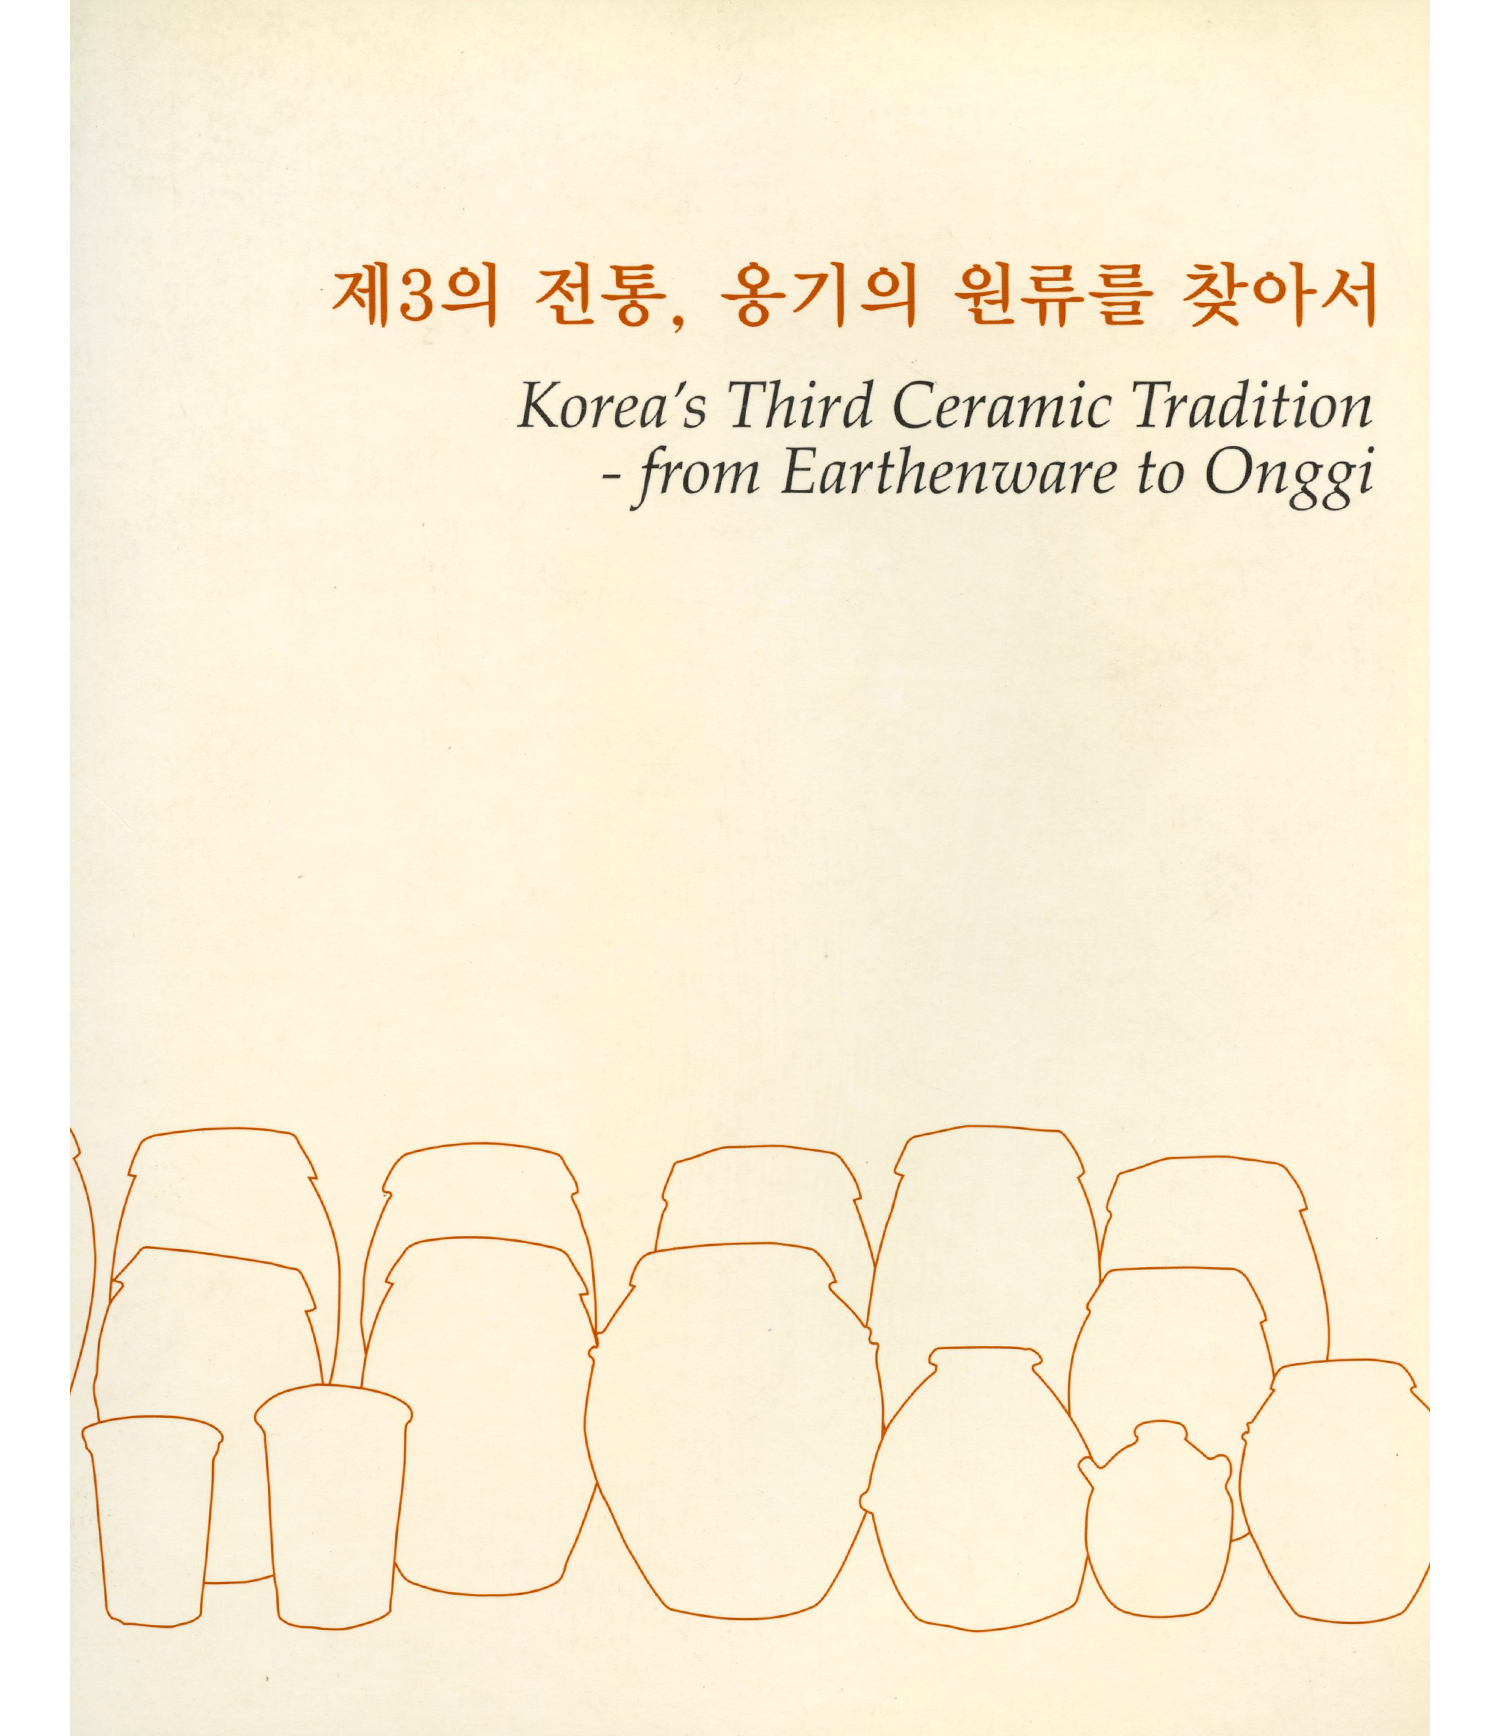 Korea’s Third Ceramic Tradition-from Earthenware to Onggi